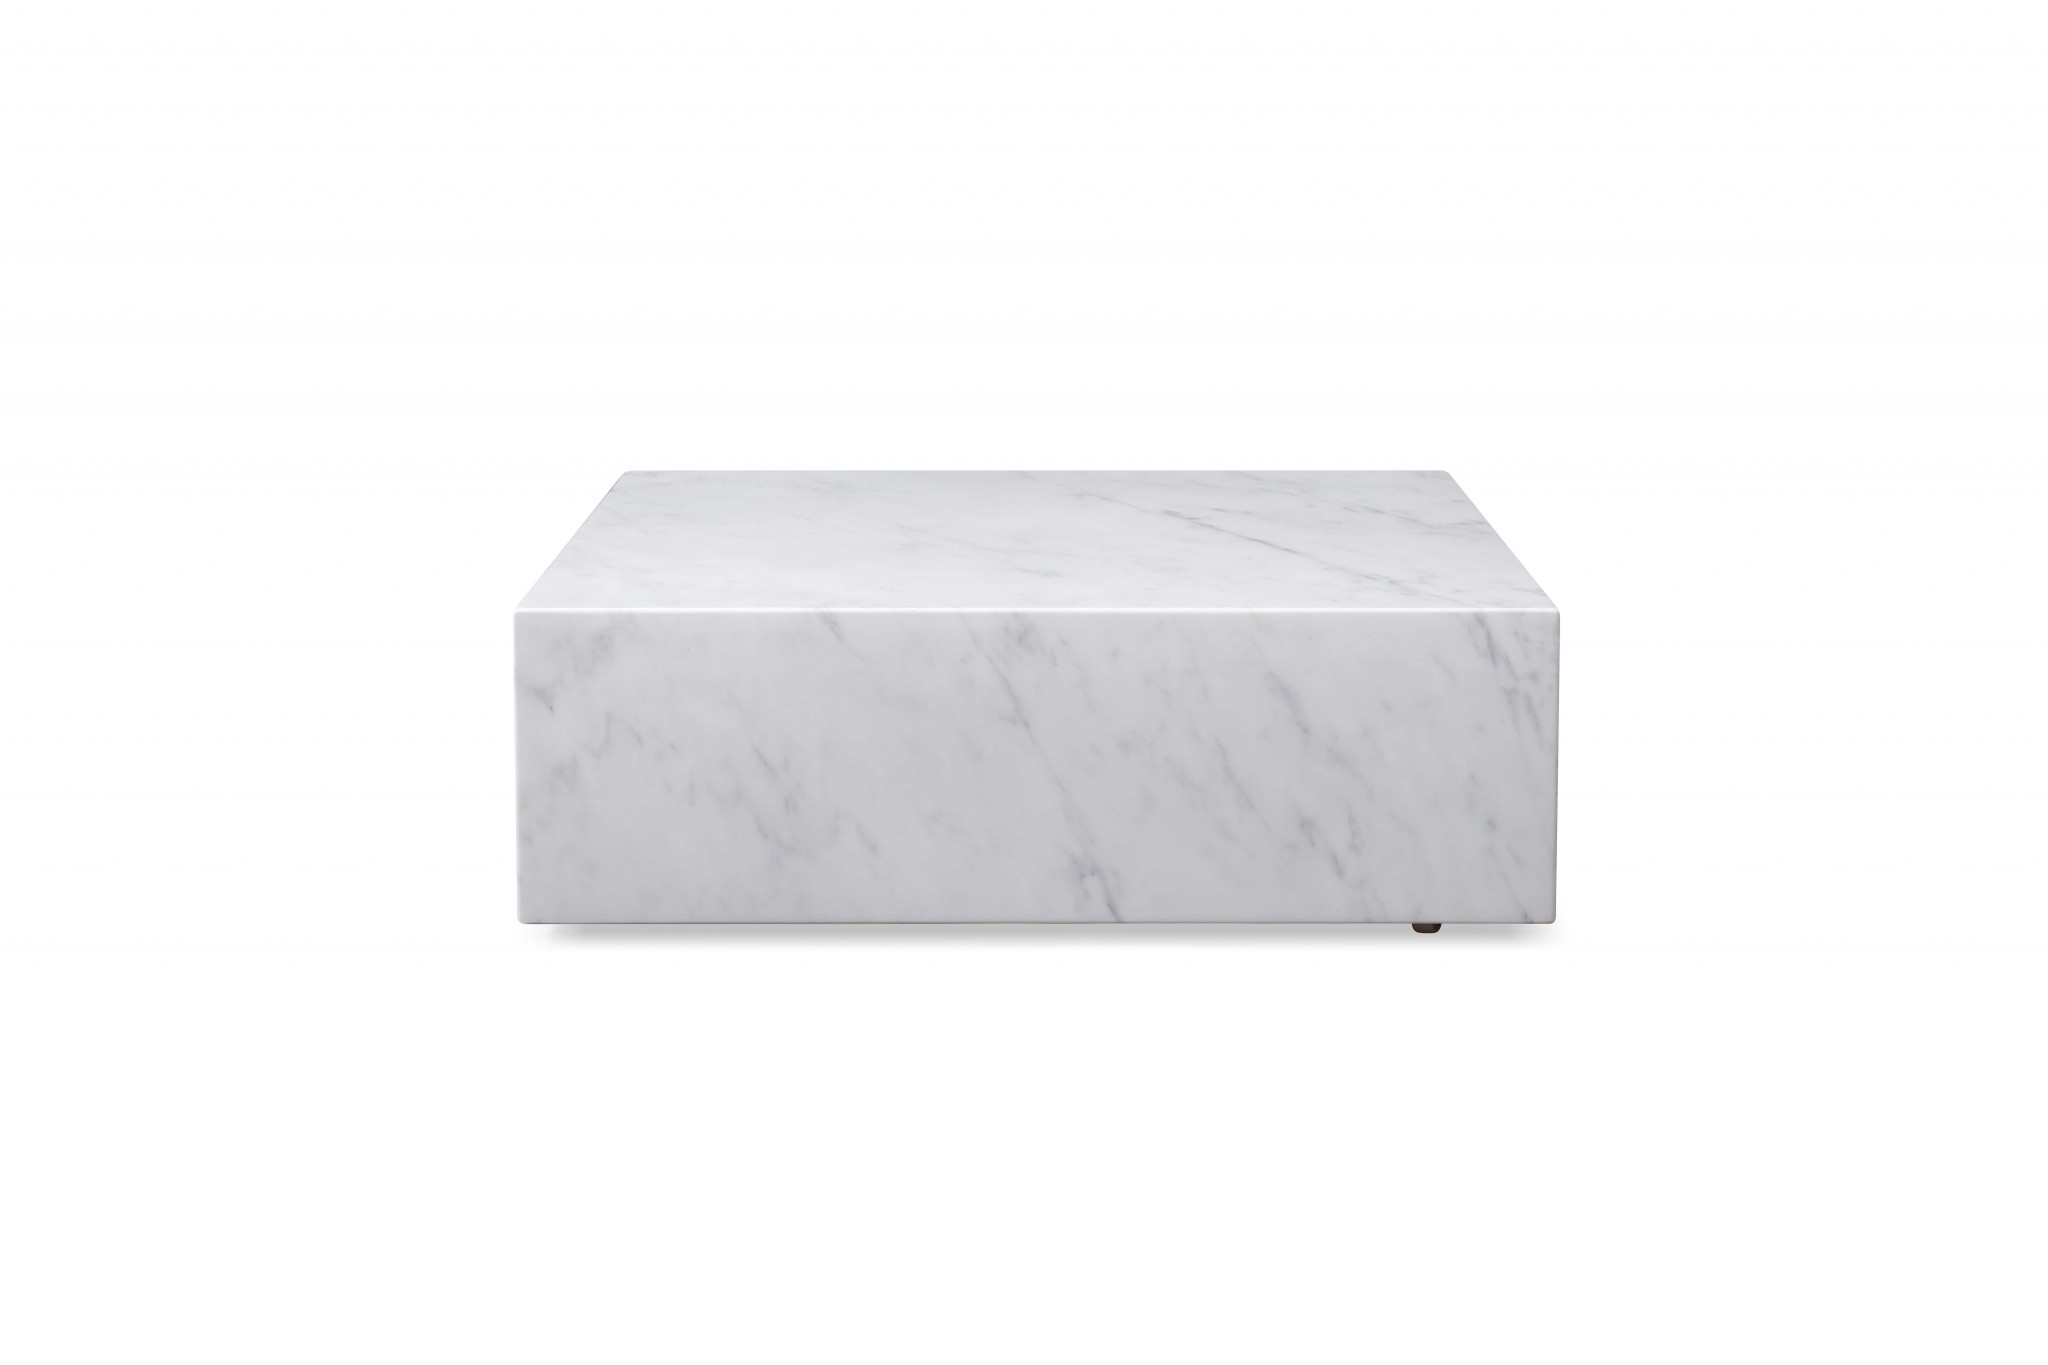 35" X 35" X 11" White Marble Coffee Table with Casters